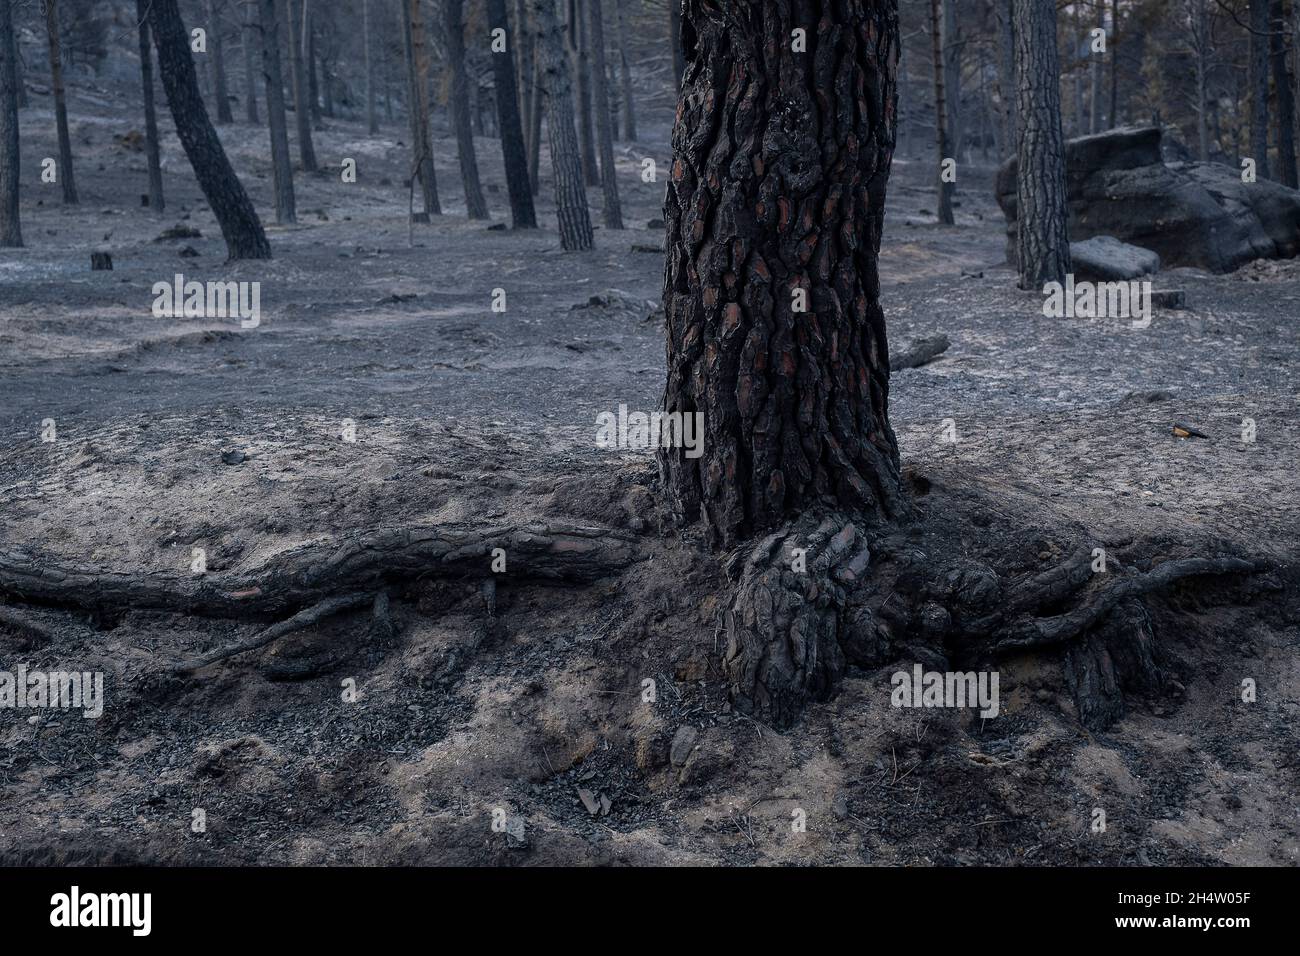 Consequences of a forest fire in Navalacruz or Navalcruz forest, Navalacruz or Navalcruz, Avila, spain Stock Photo